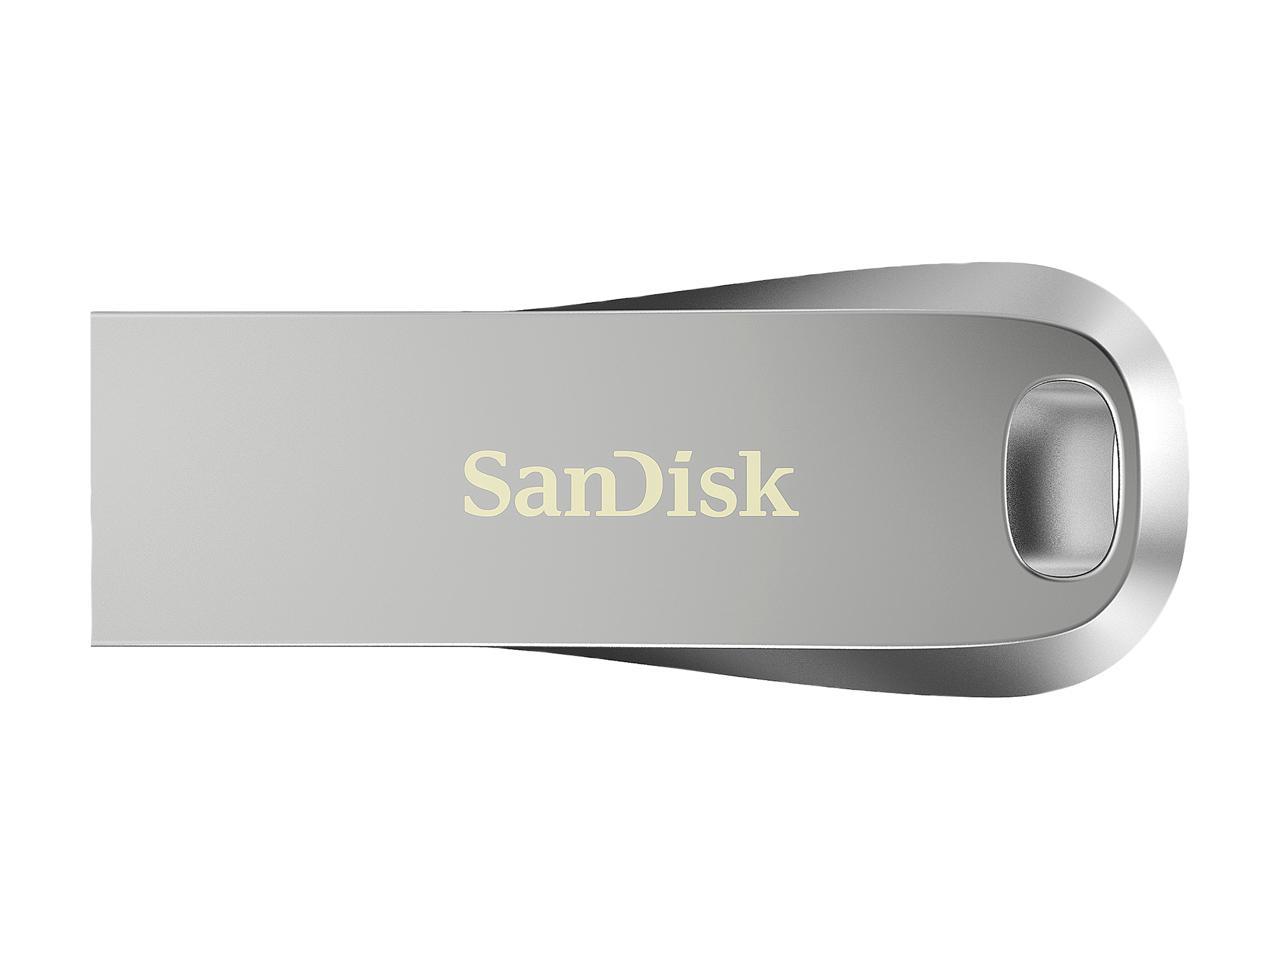 Sandisk 512Gb Ultra Luxe Usb 3.1 Flash Drive, Speed Up To 150Mb/S (Sdcz74-512G-G46)